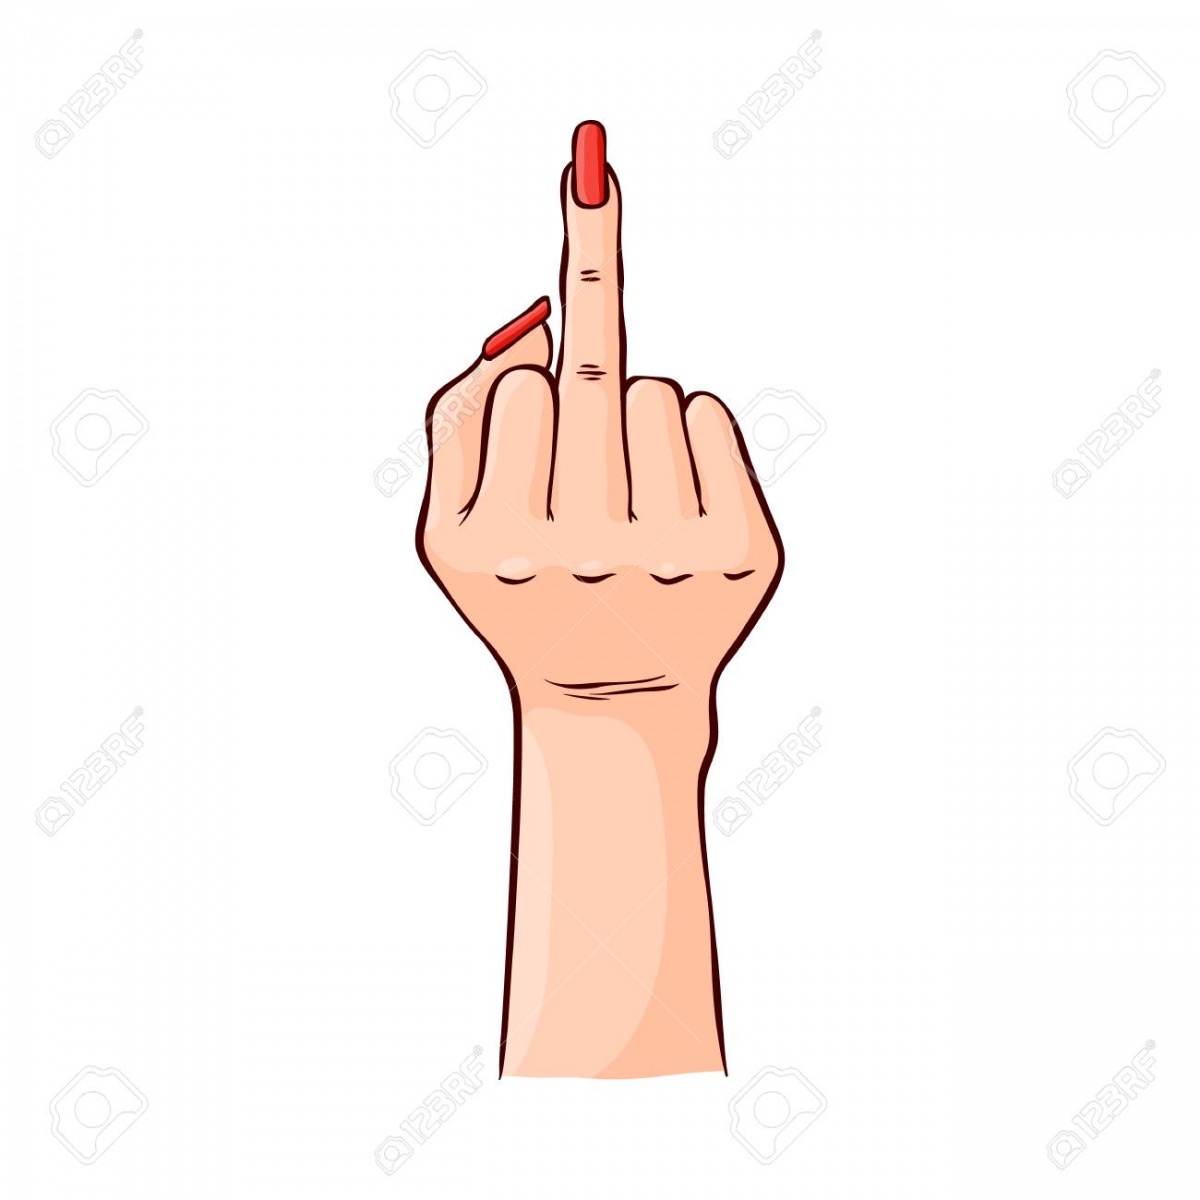 Name:  110946880-vector-illustration-of-female-hand-showing-rude--you-gesture-in-sketch-style-isola.jpg
Views: 107
Size:  136.0 KB